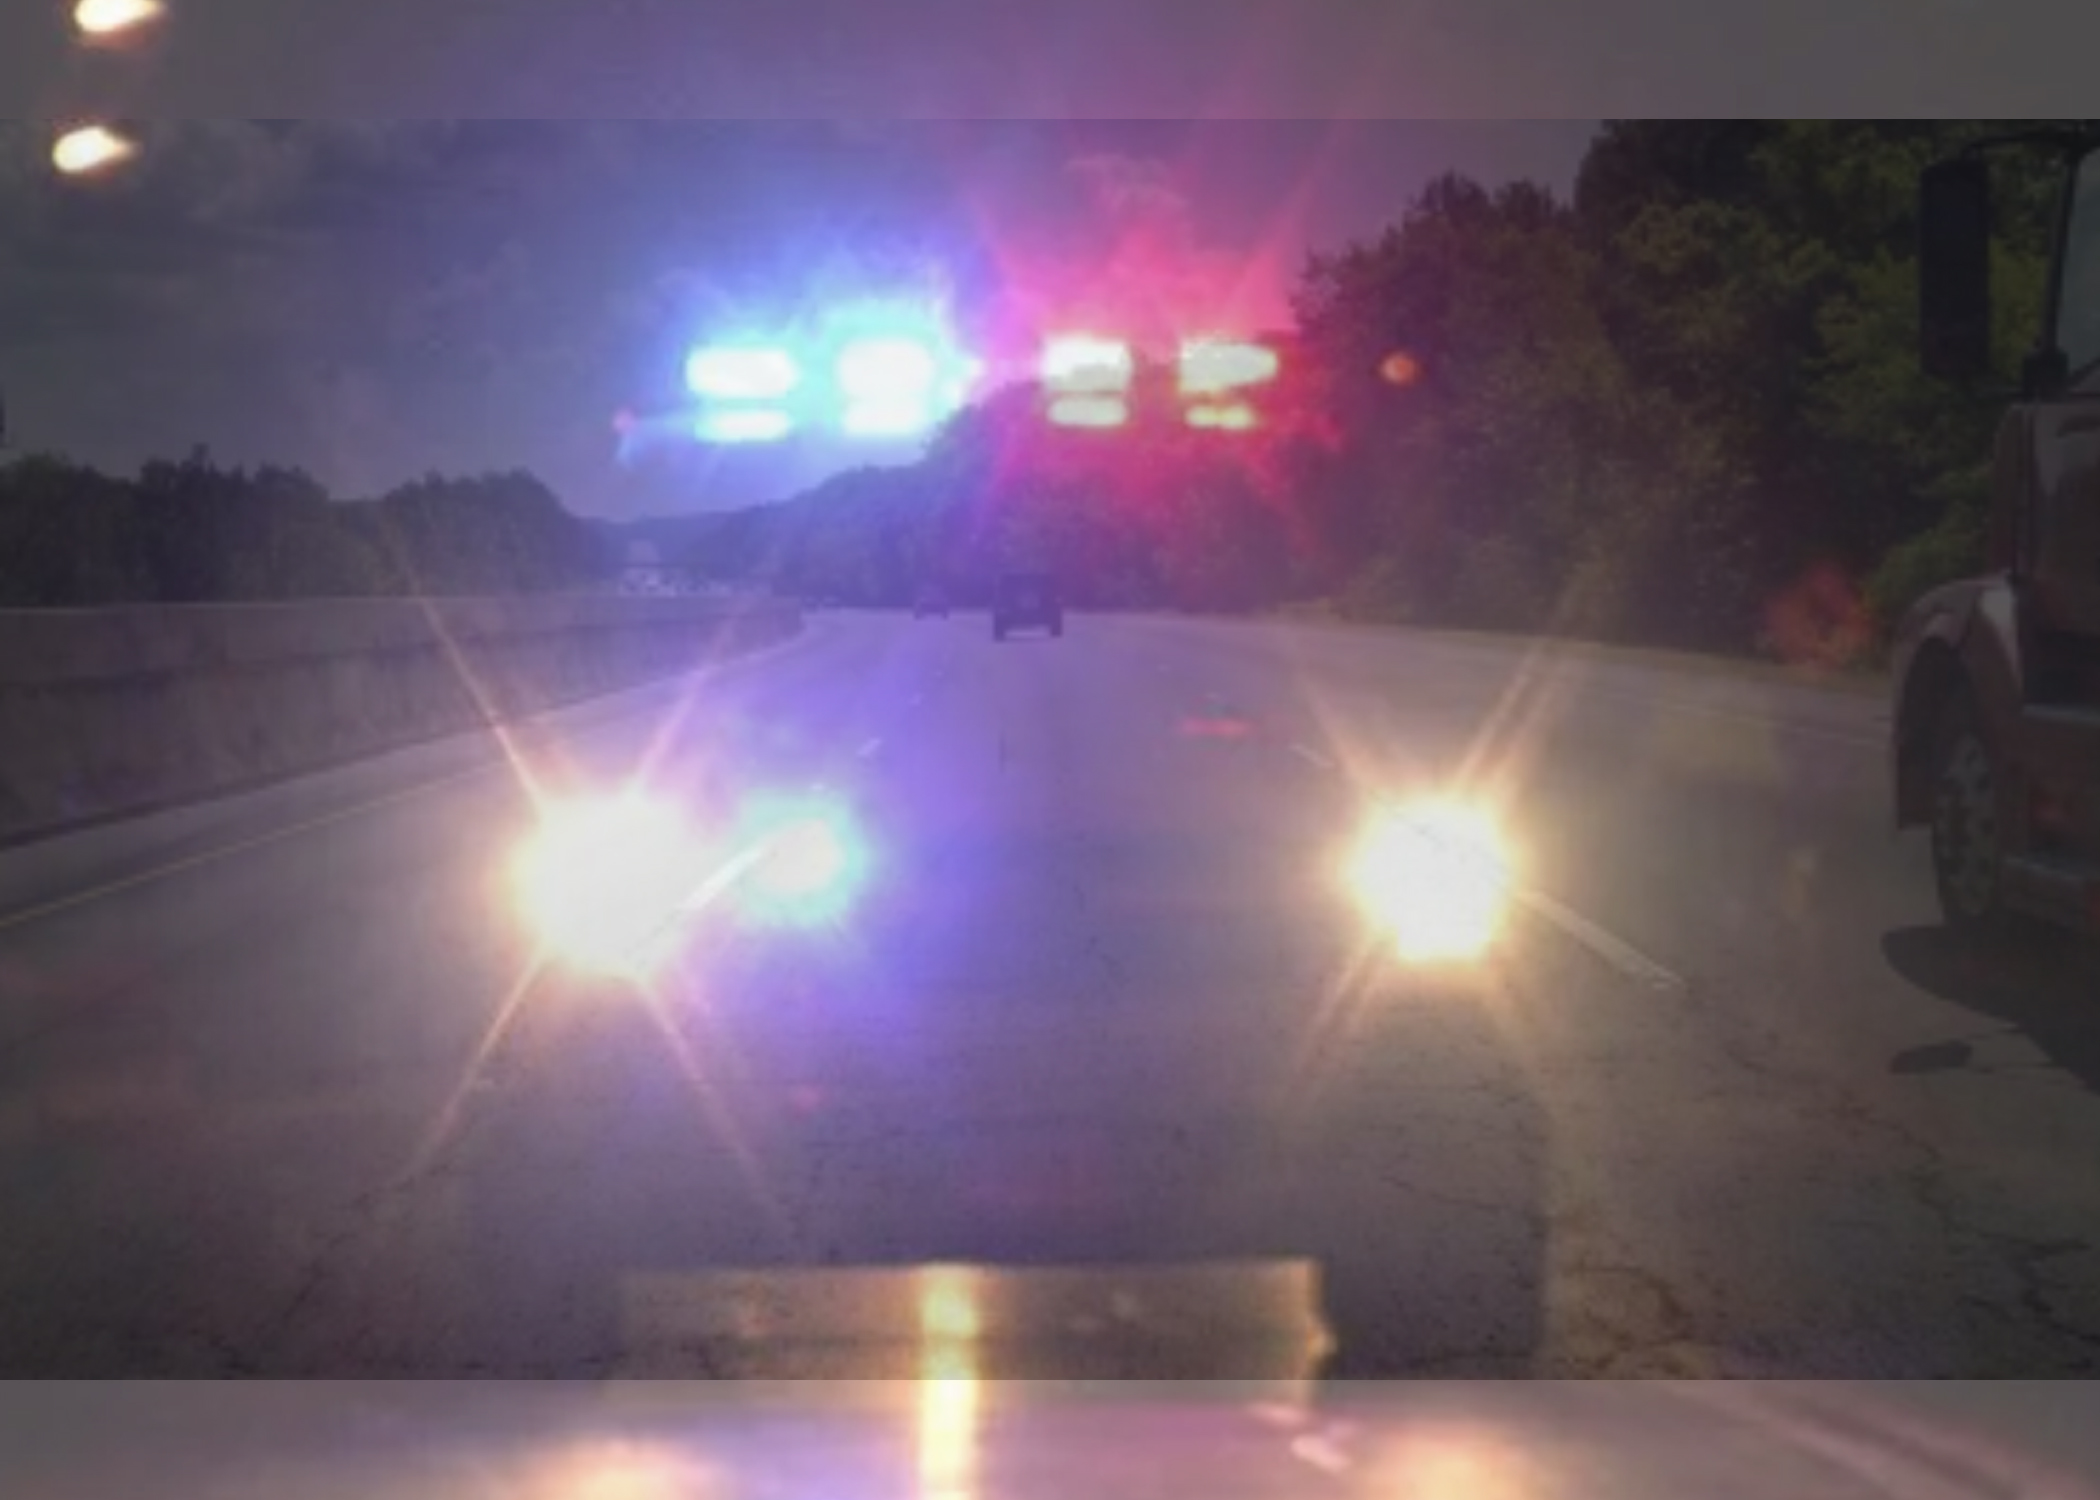 BREAKING: Police chase underway from St. Clair County into Jefferson County